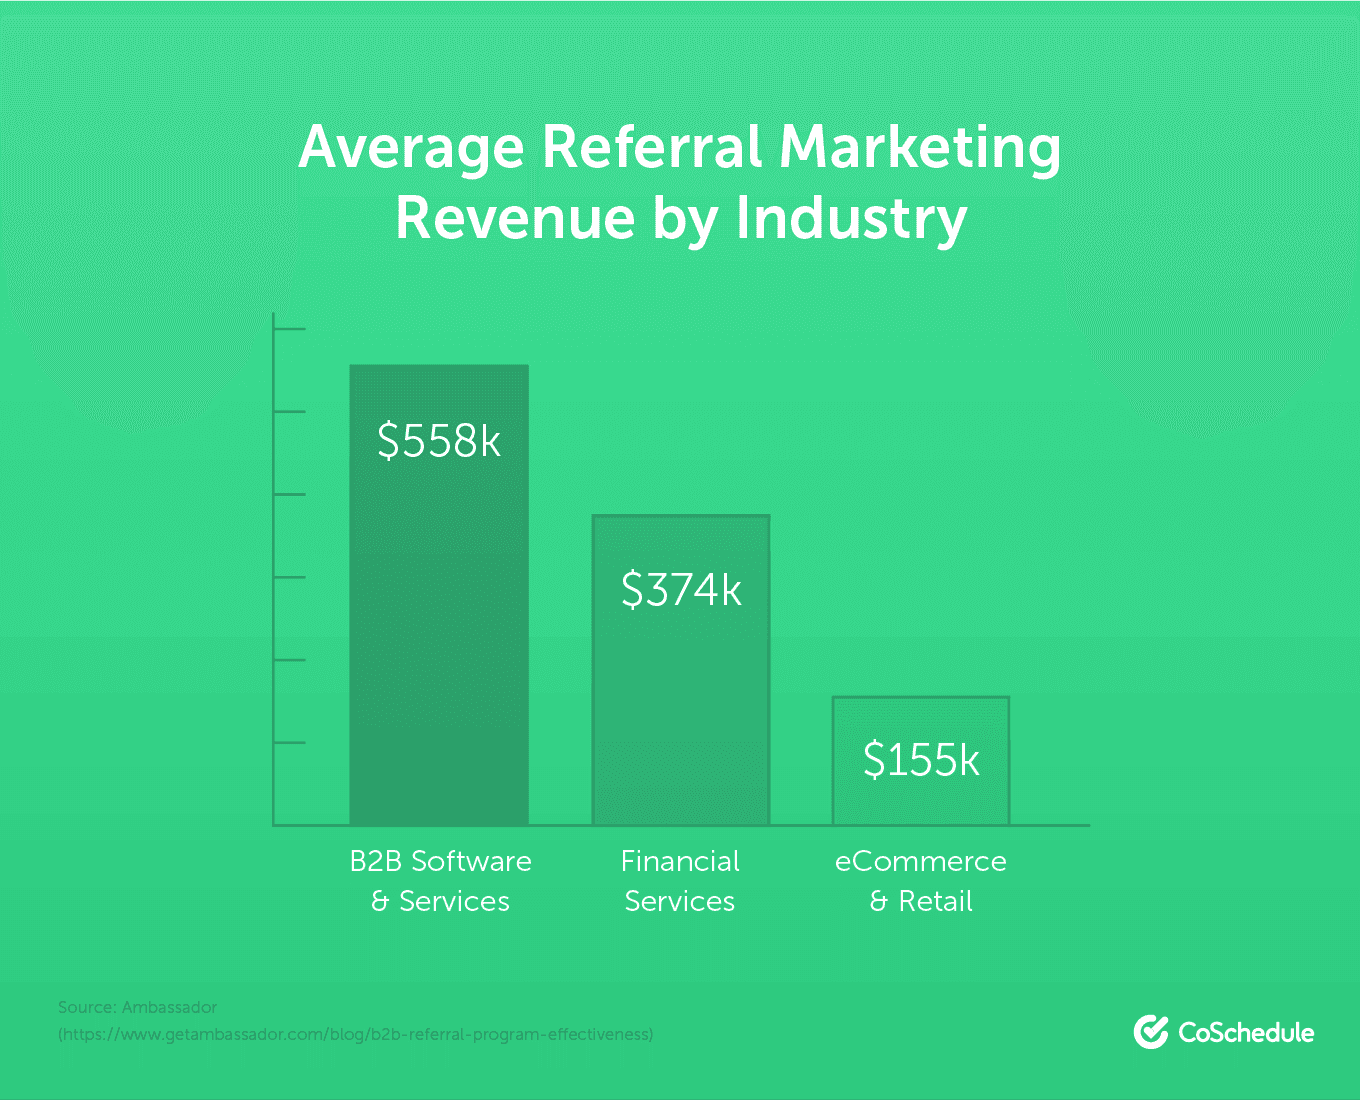 Statistic on referral marketing